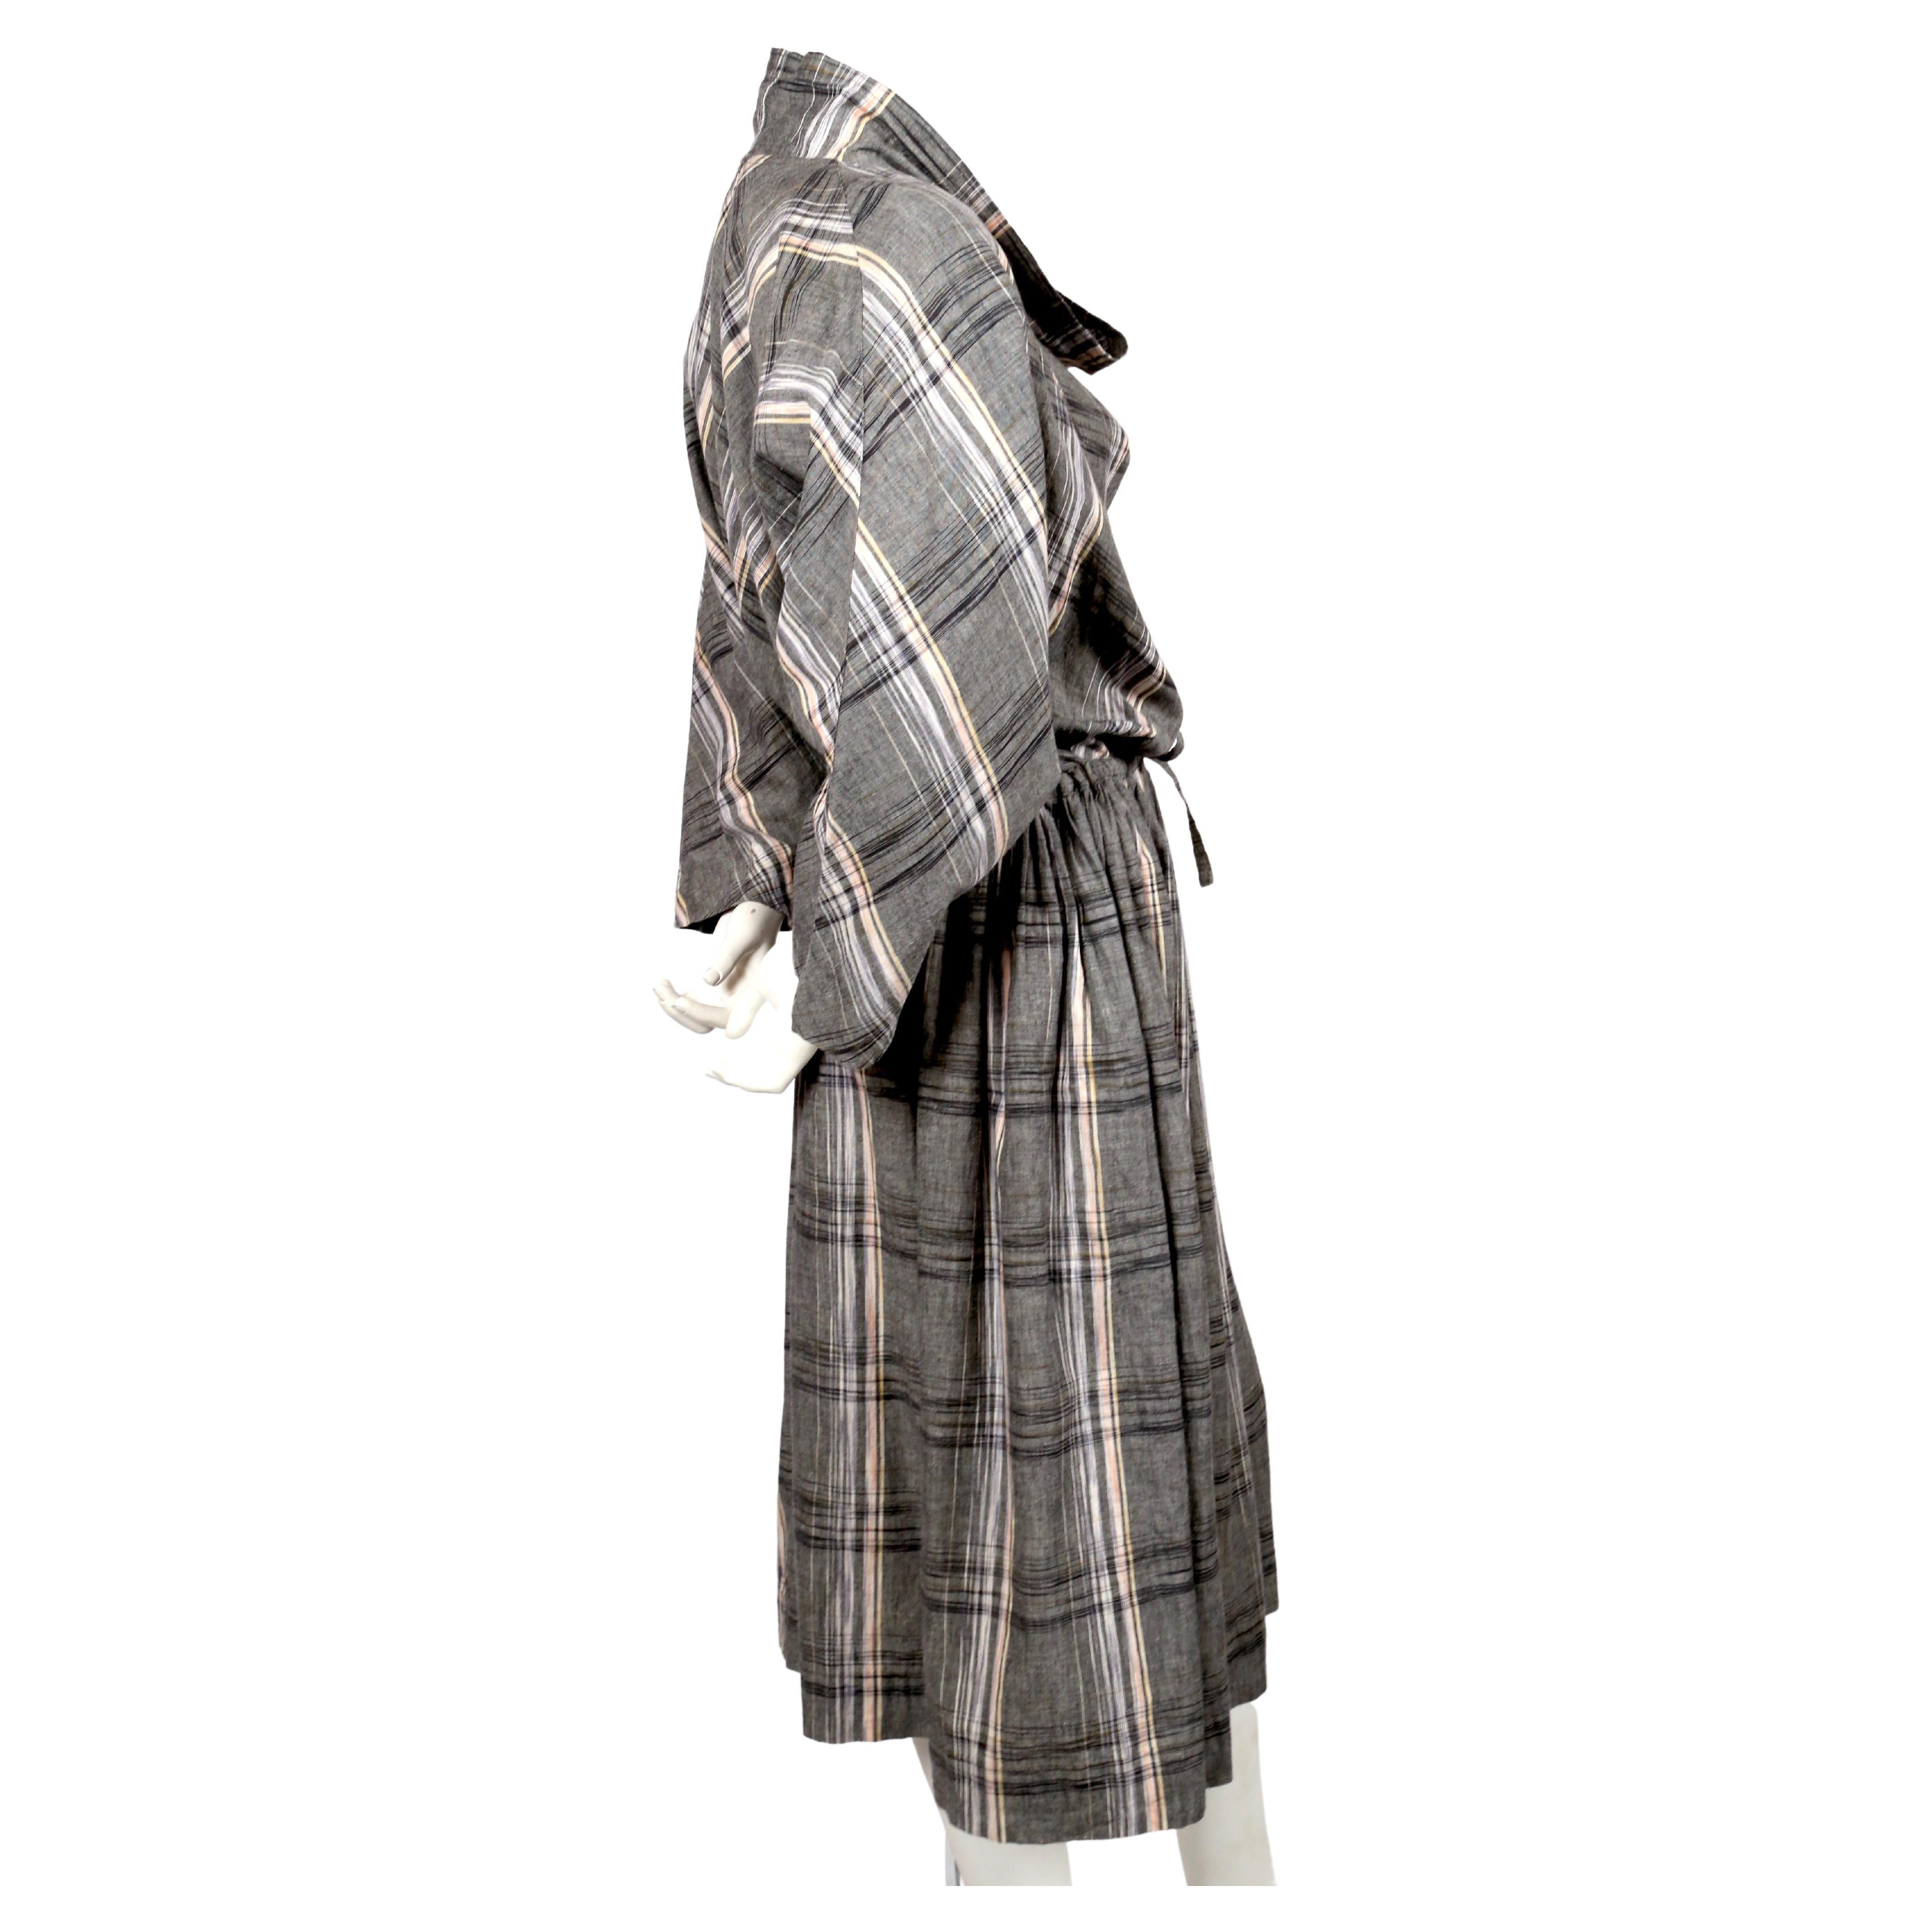 Plaid linen blend dress with cowl neckline, drop waist with drawstring and three quarter length sleeves designed by Issey Miyake dating to the early 1980's. Japanese size M, however this fits many sizes due to the oversized cut. Approximate length: